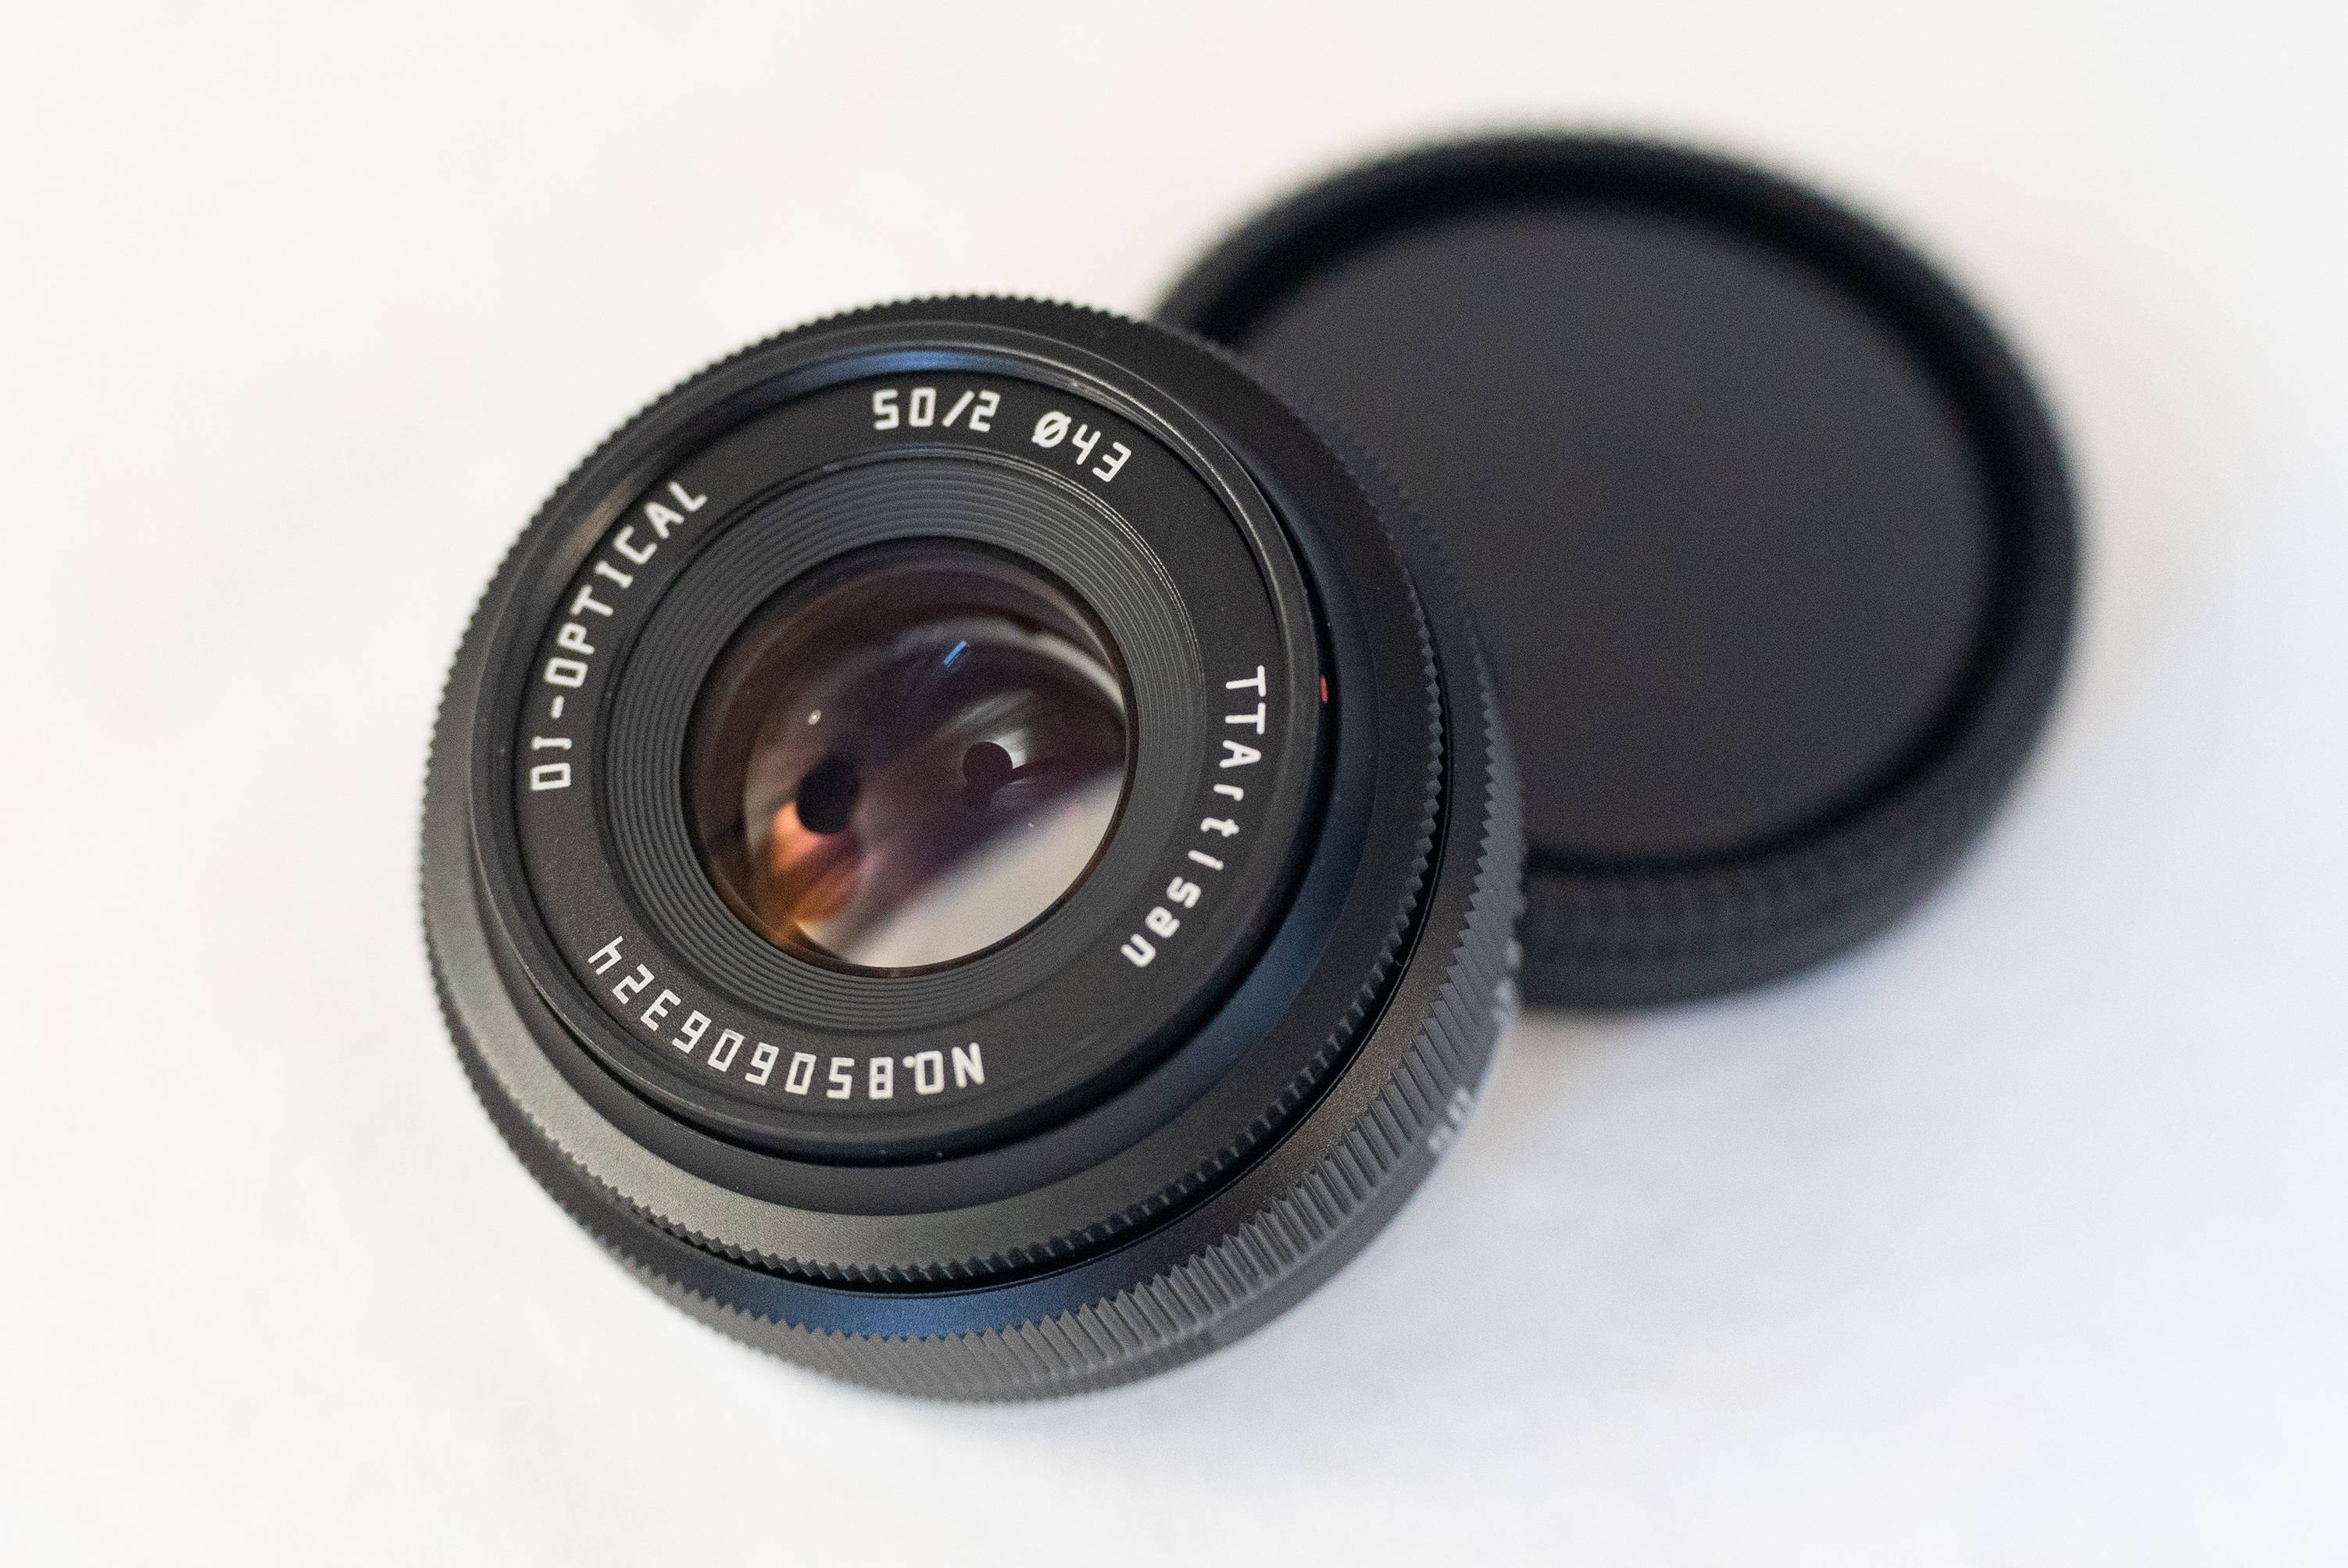 View of the lens from the side of the front lens.